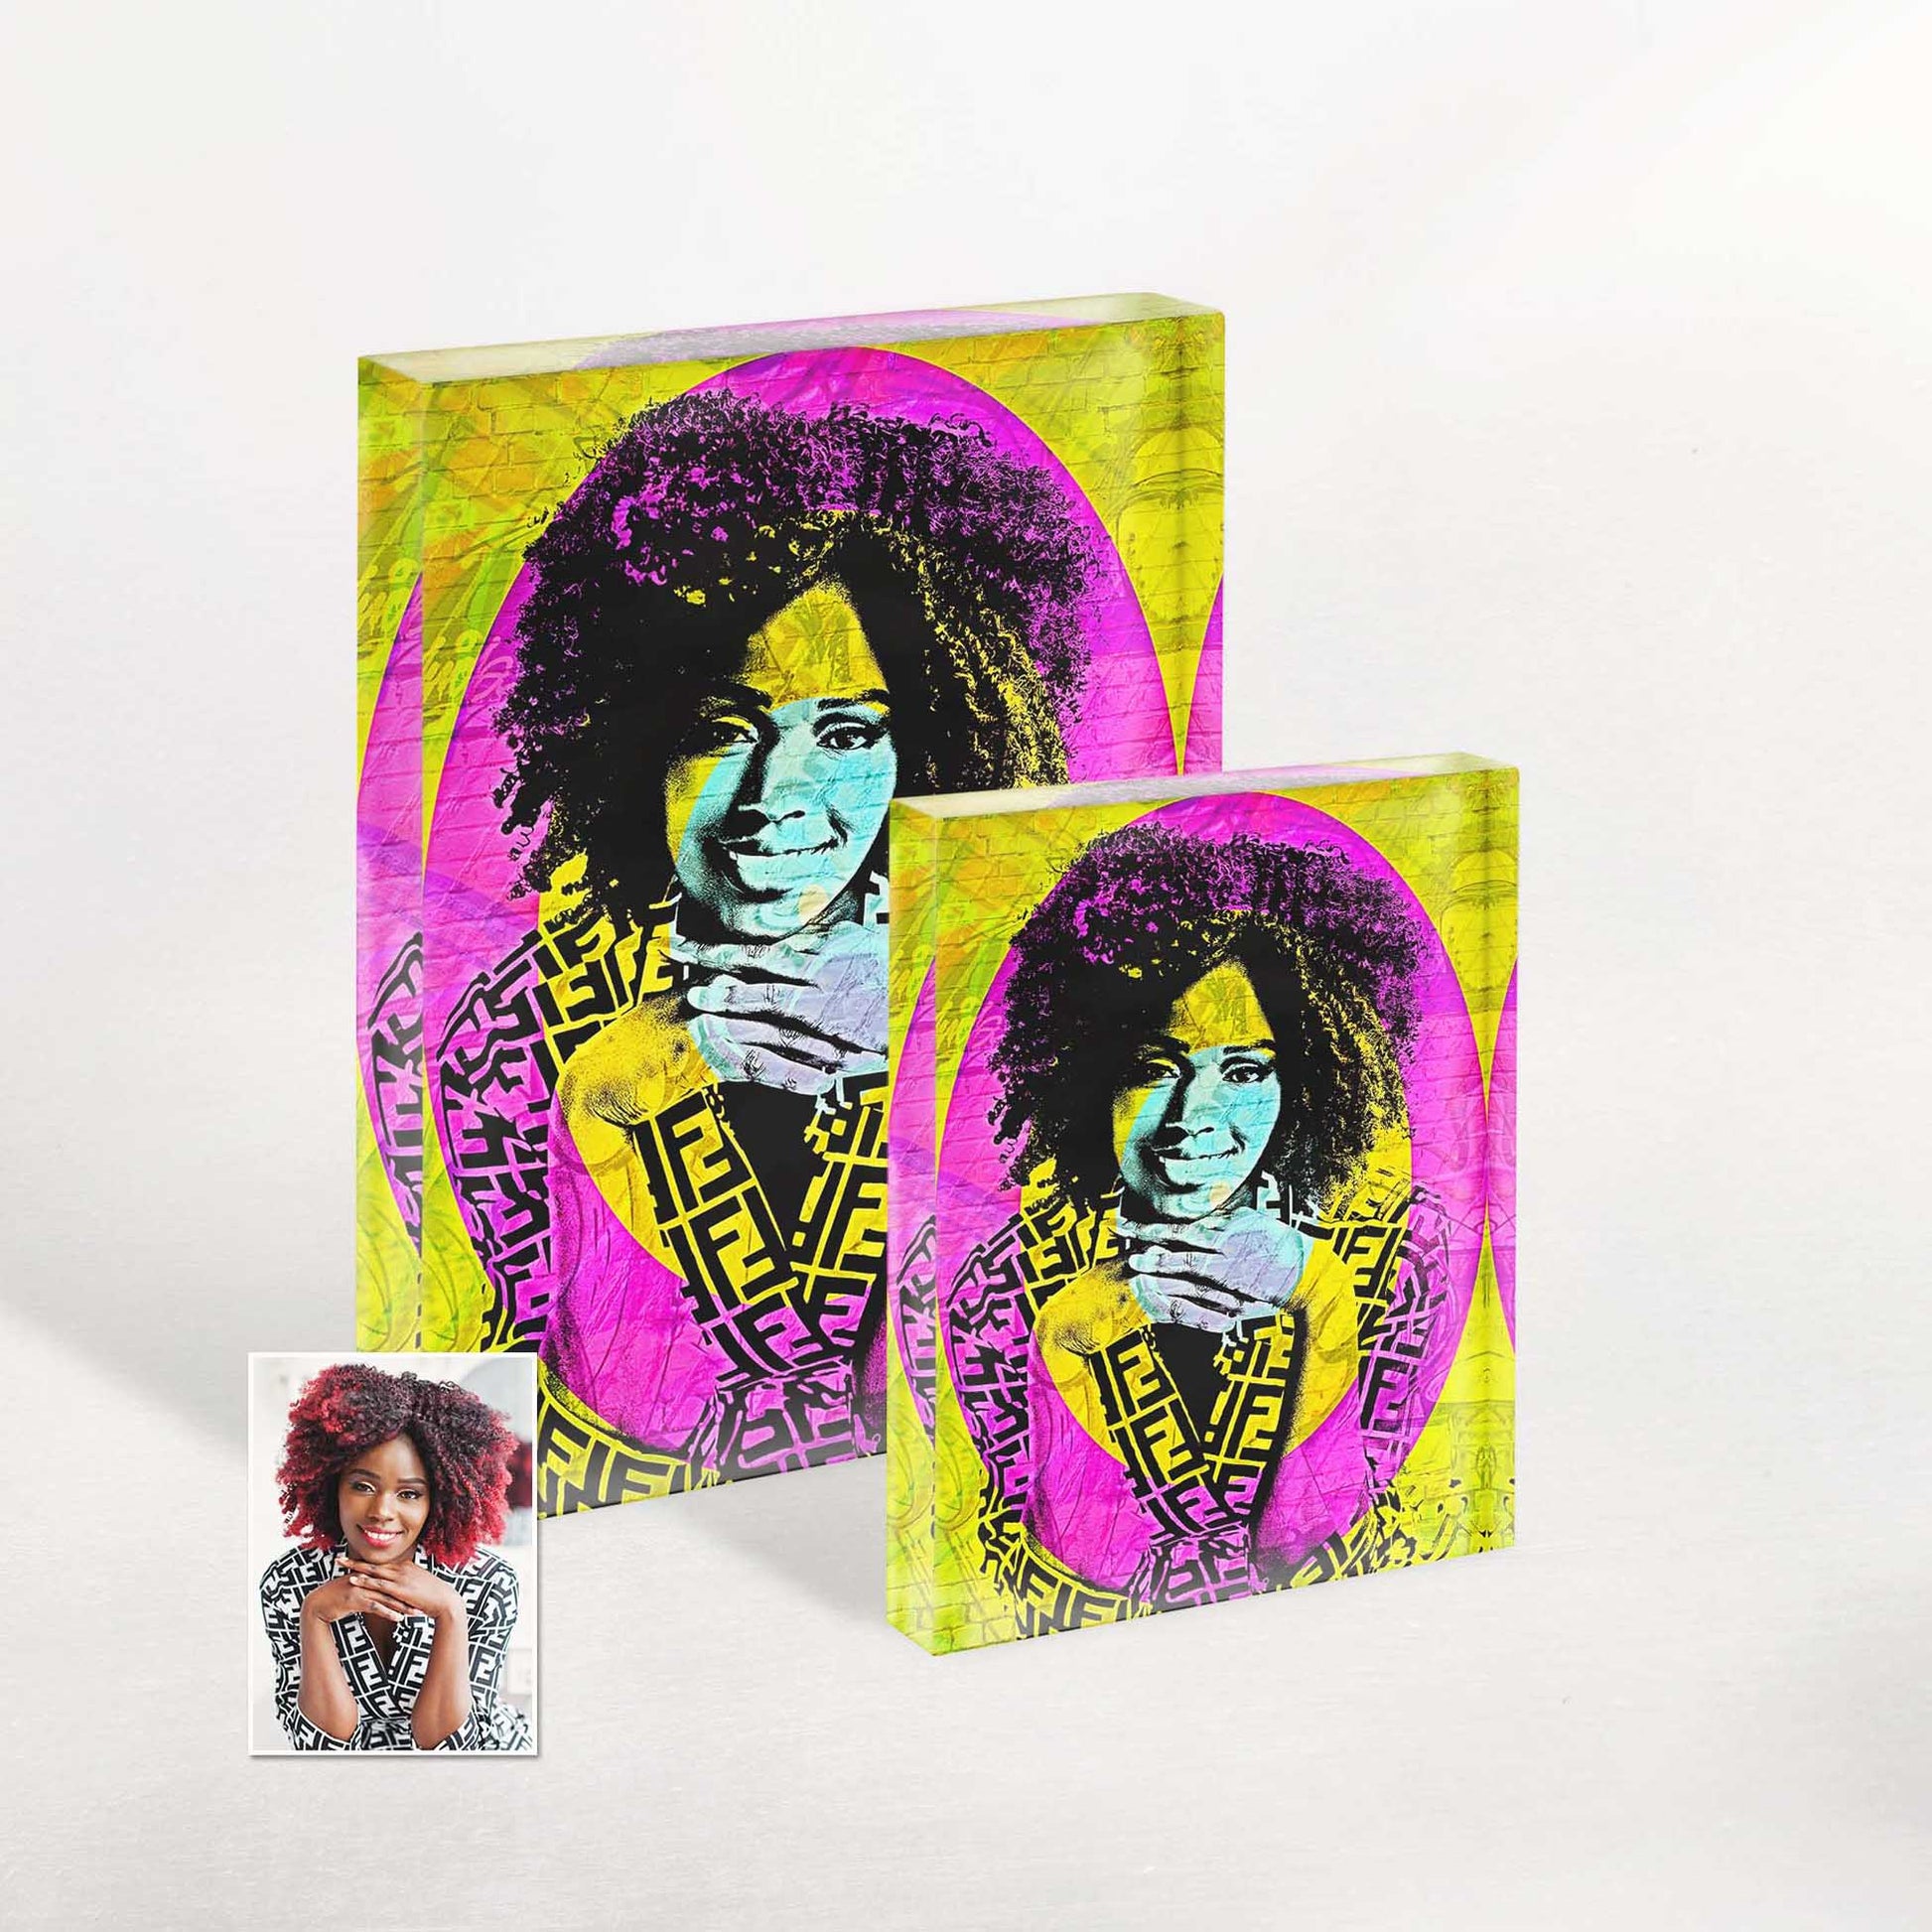 Infuse your space with urban energy through the Personalised Graffiti Street Art Acrylic Block Photo. Its cool and fresh design, showcasing colorful and vibrant graffiti, adds a novel touch to couples' anniversary gifts